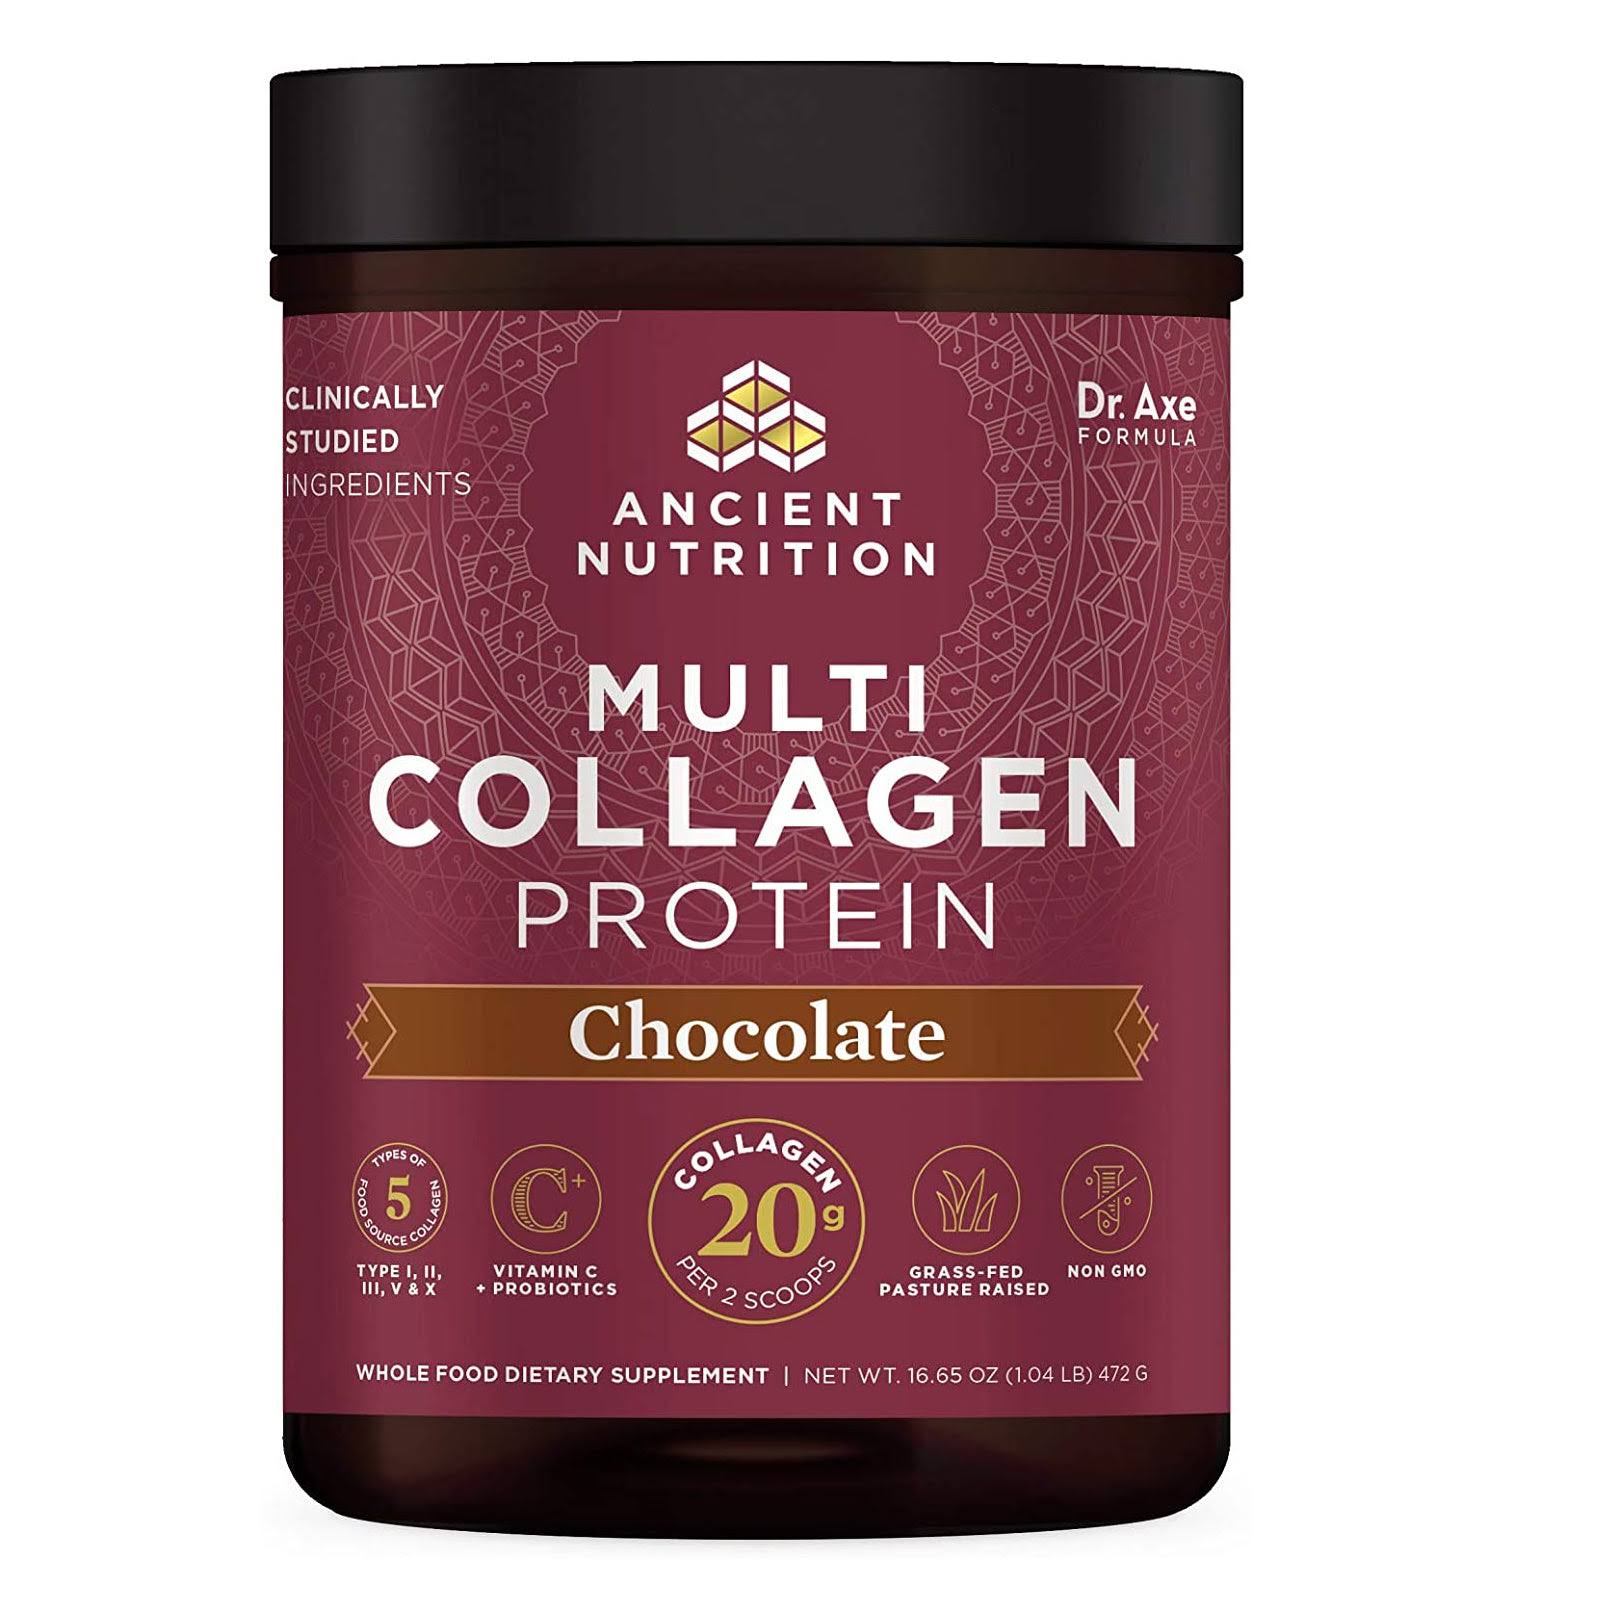 Dr. Axe / Ancient Nutrition Multi Collagen Protein - Chocolate 472g